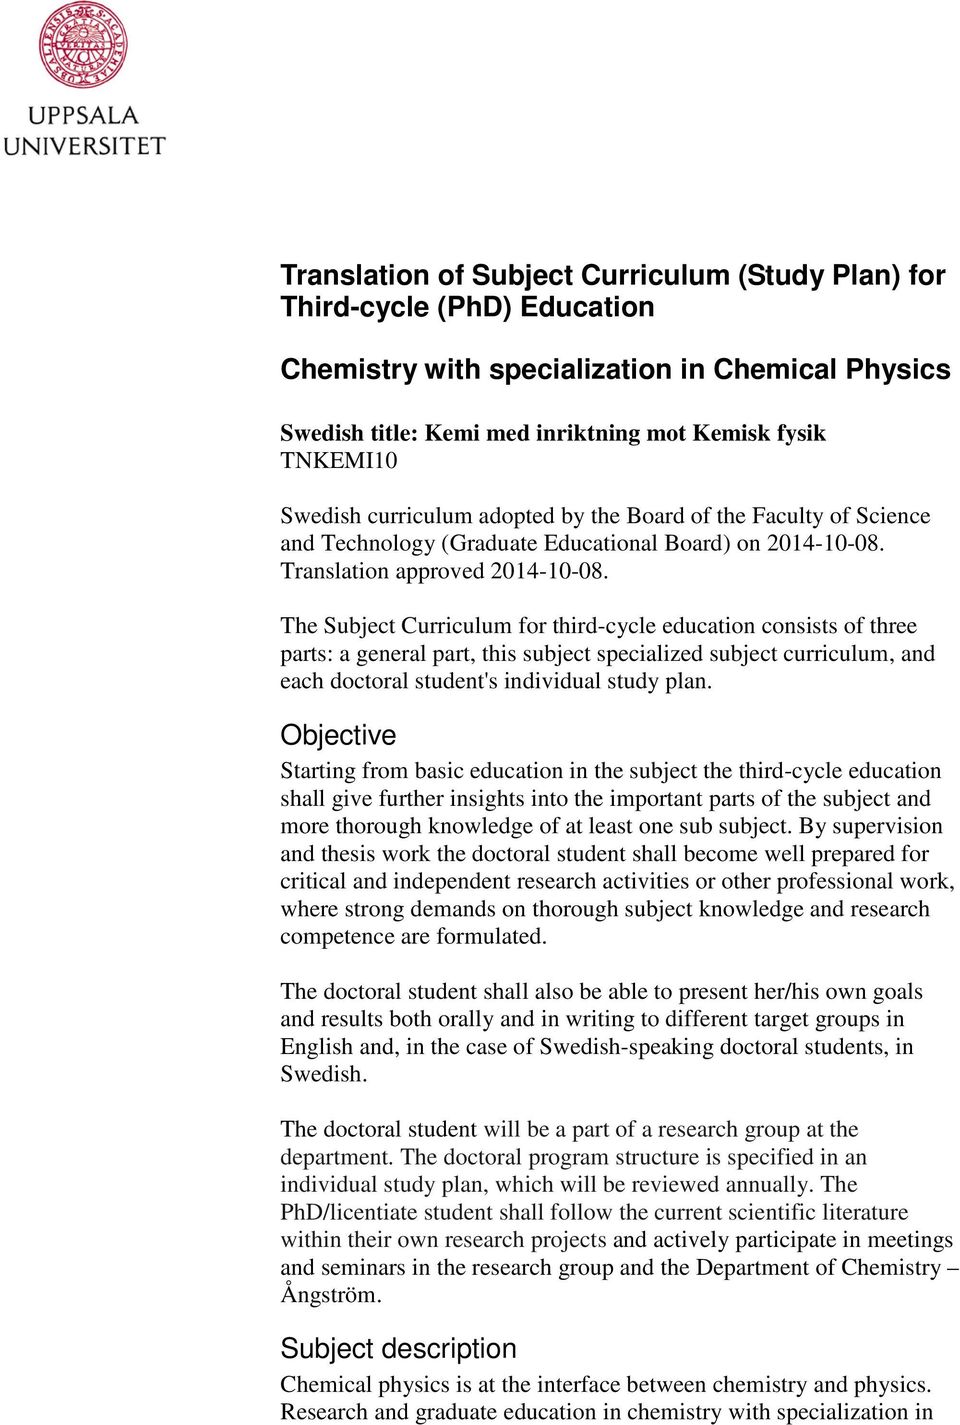 The Subject Curriculum for third-cycle education consists of three parts: a general part, this subject specialized subject curriculum, and each doctoral student's individual study plan.